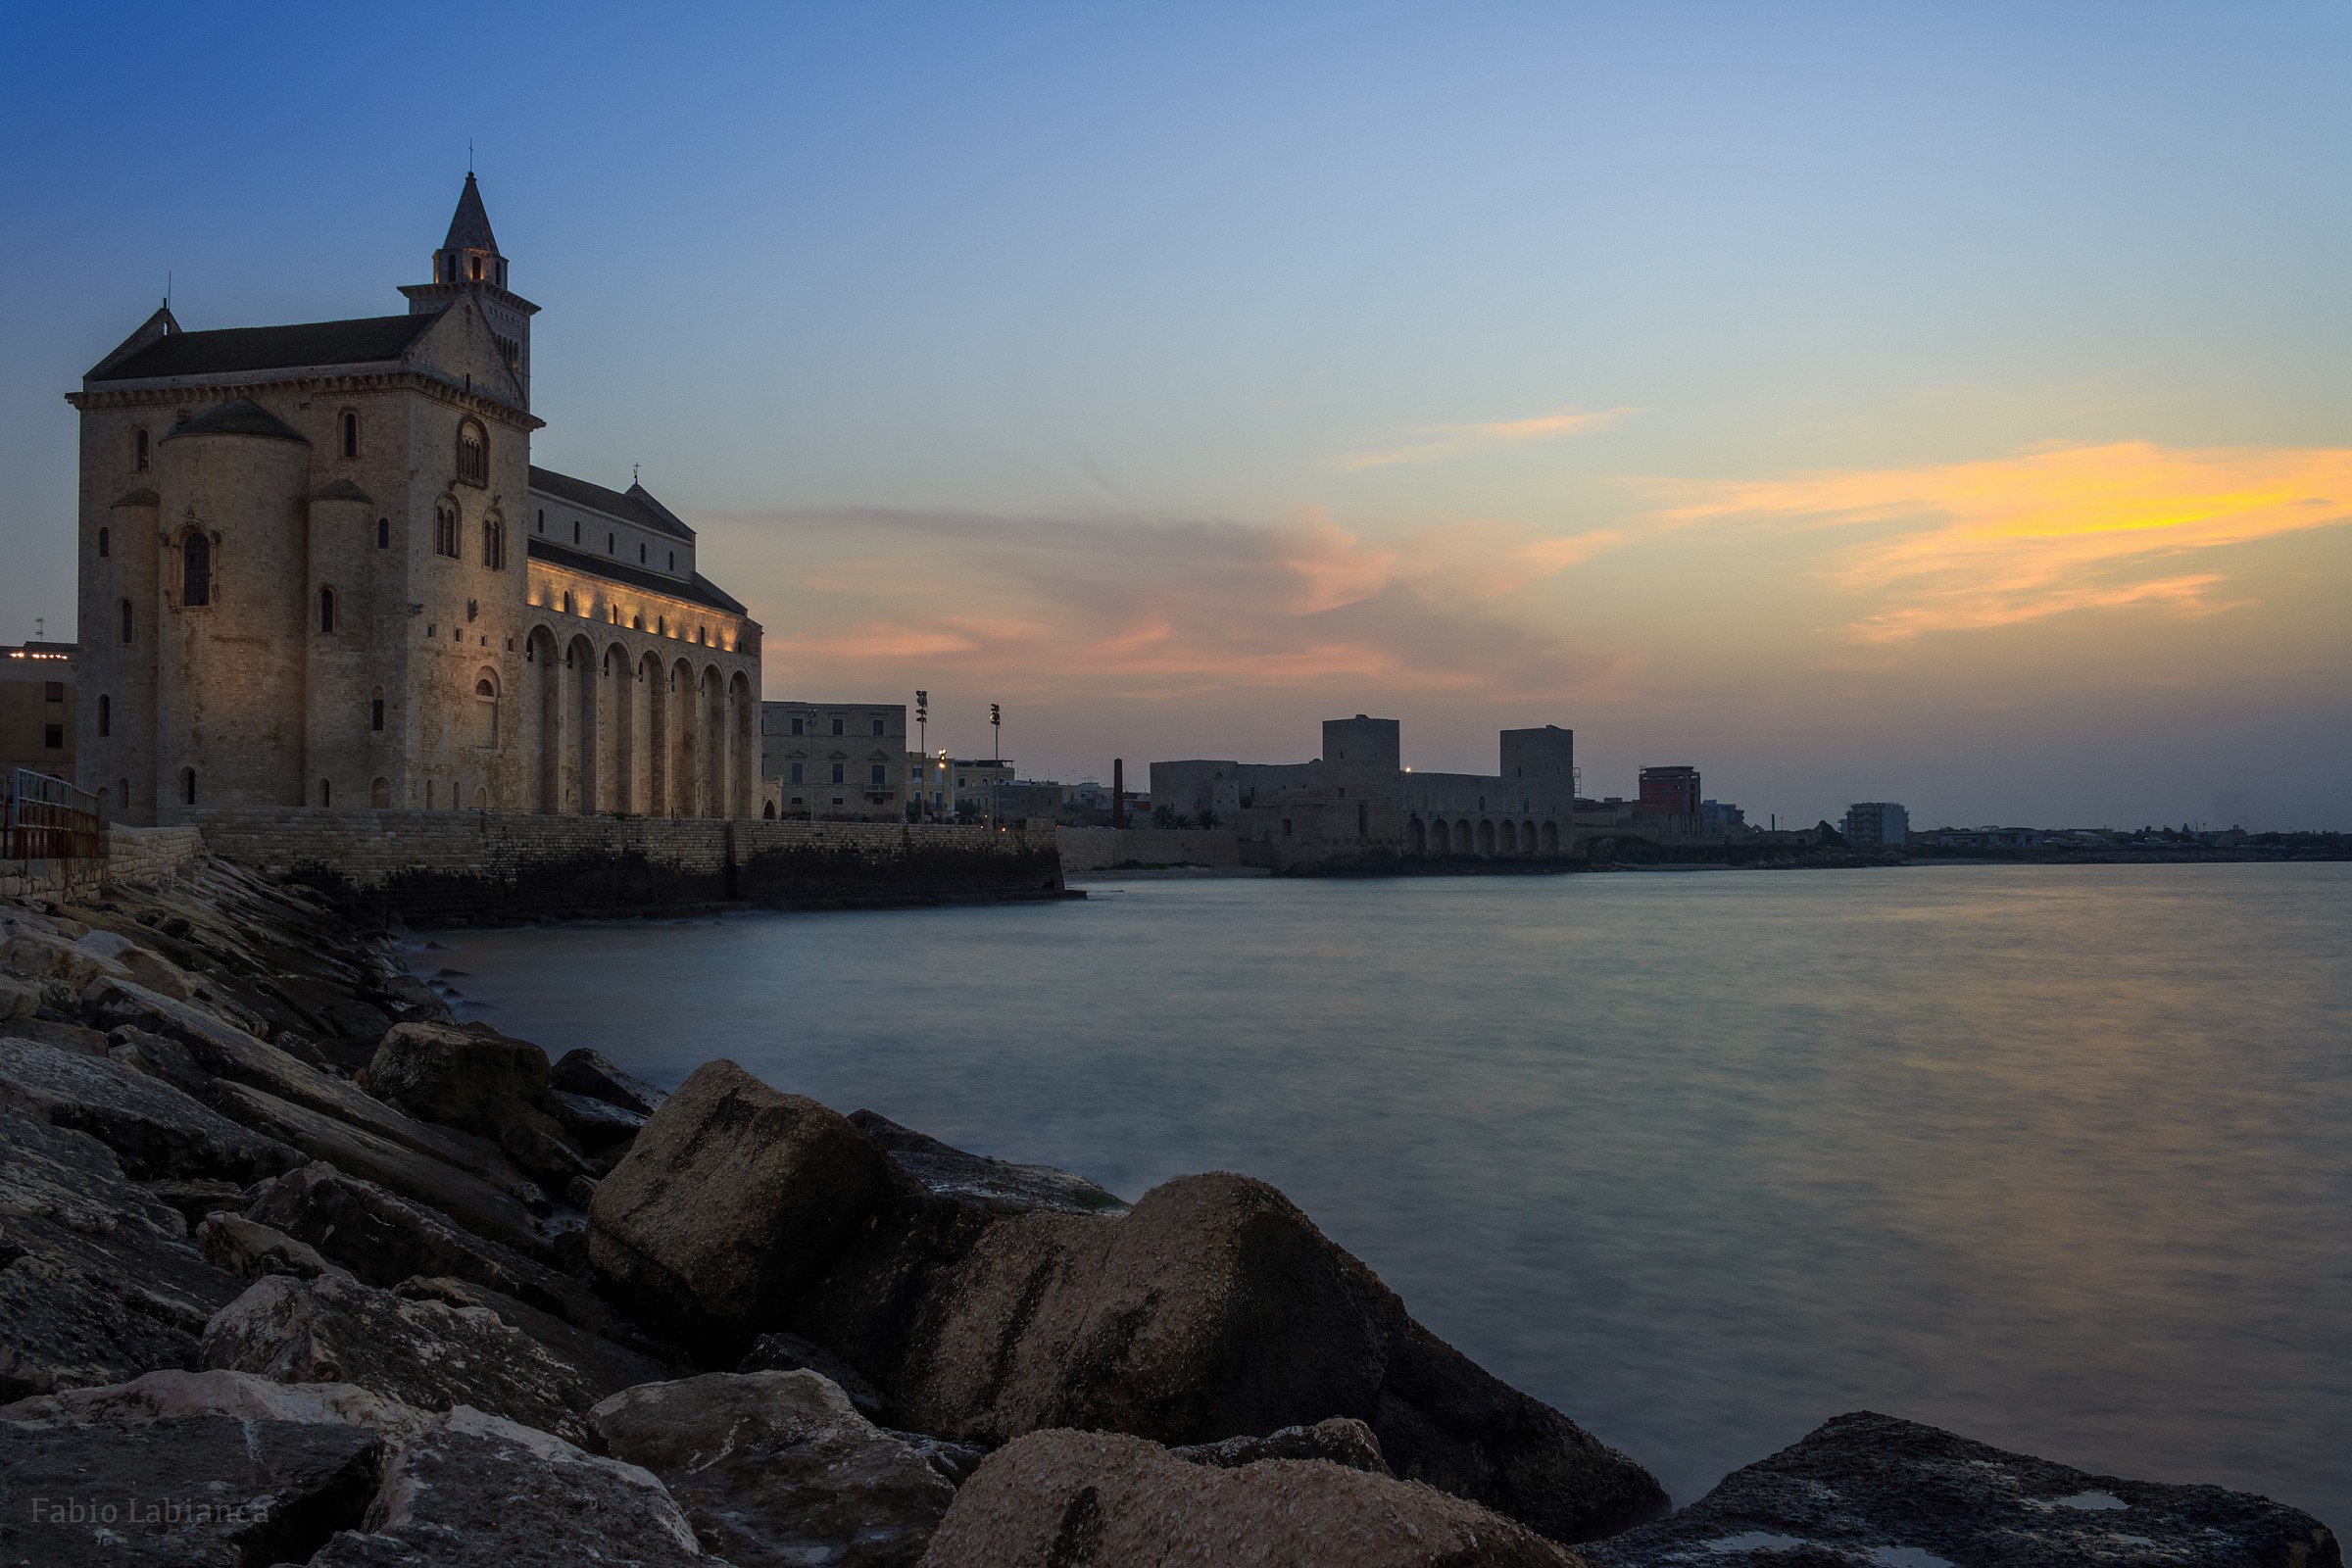 Cathedral and castle of Trani...